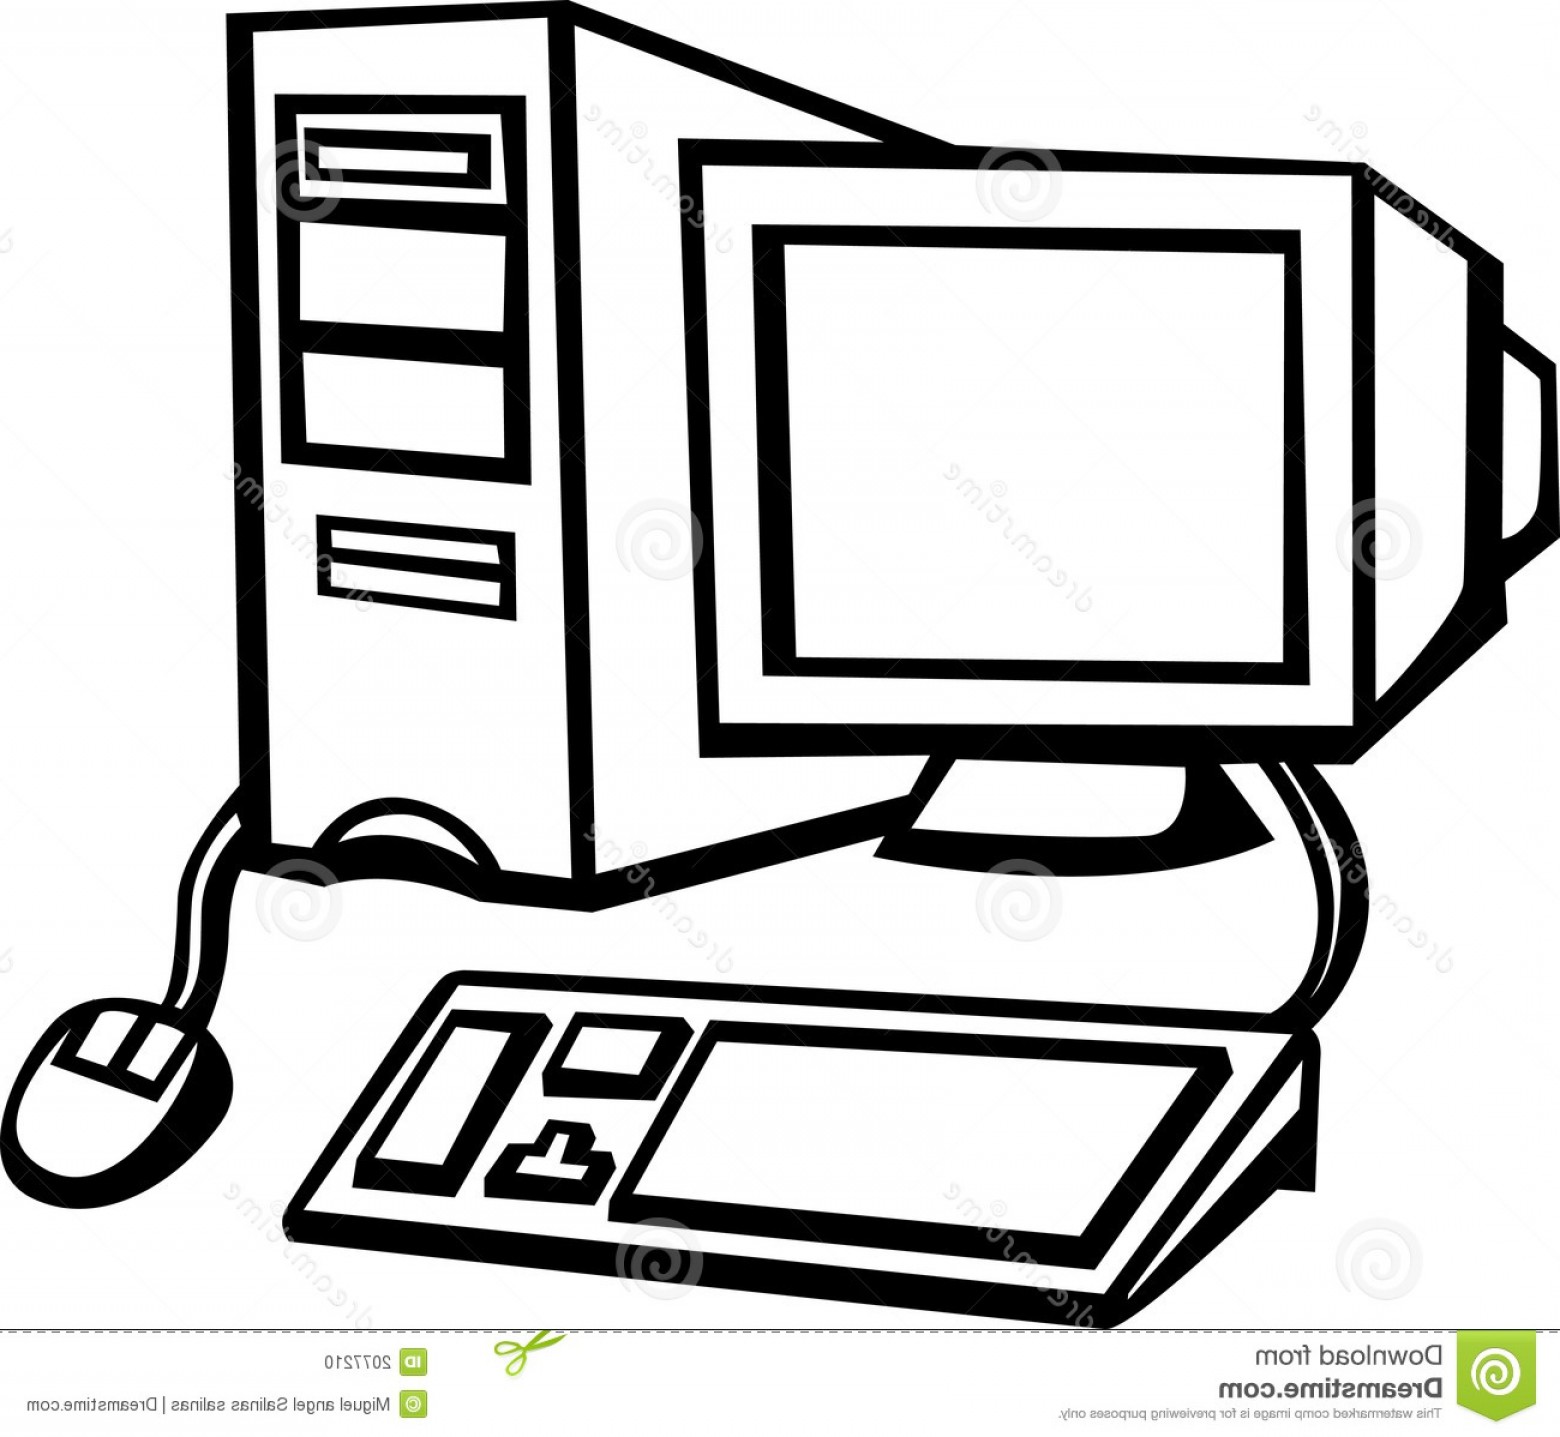 Computer monitor clipart black and white